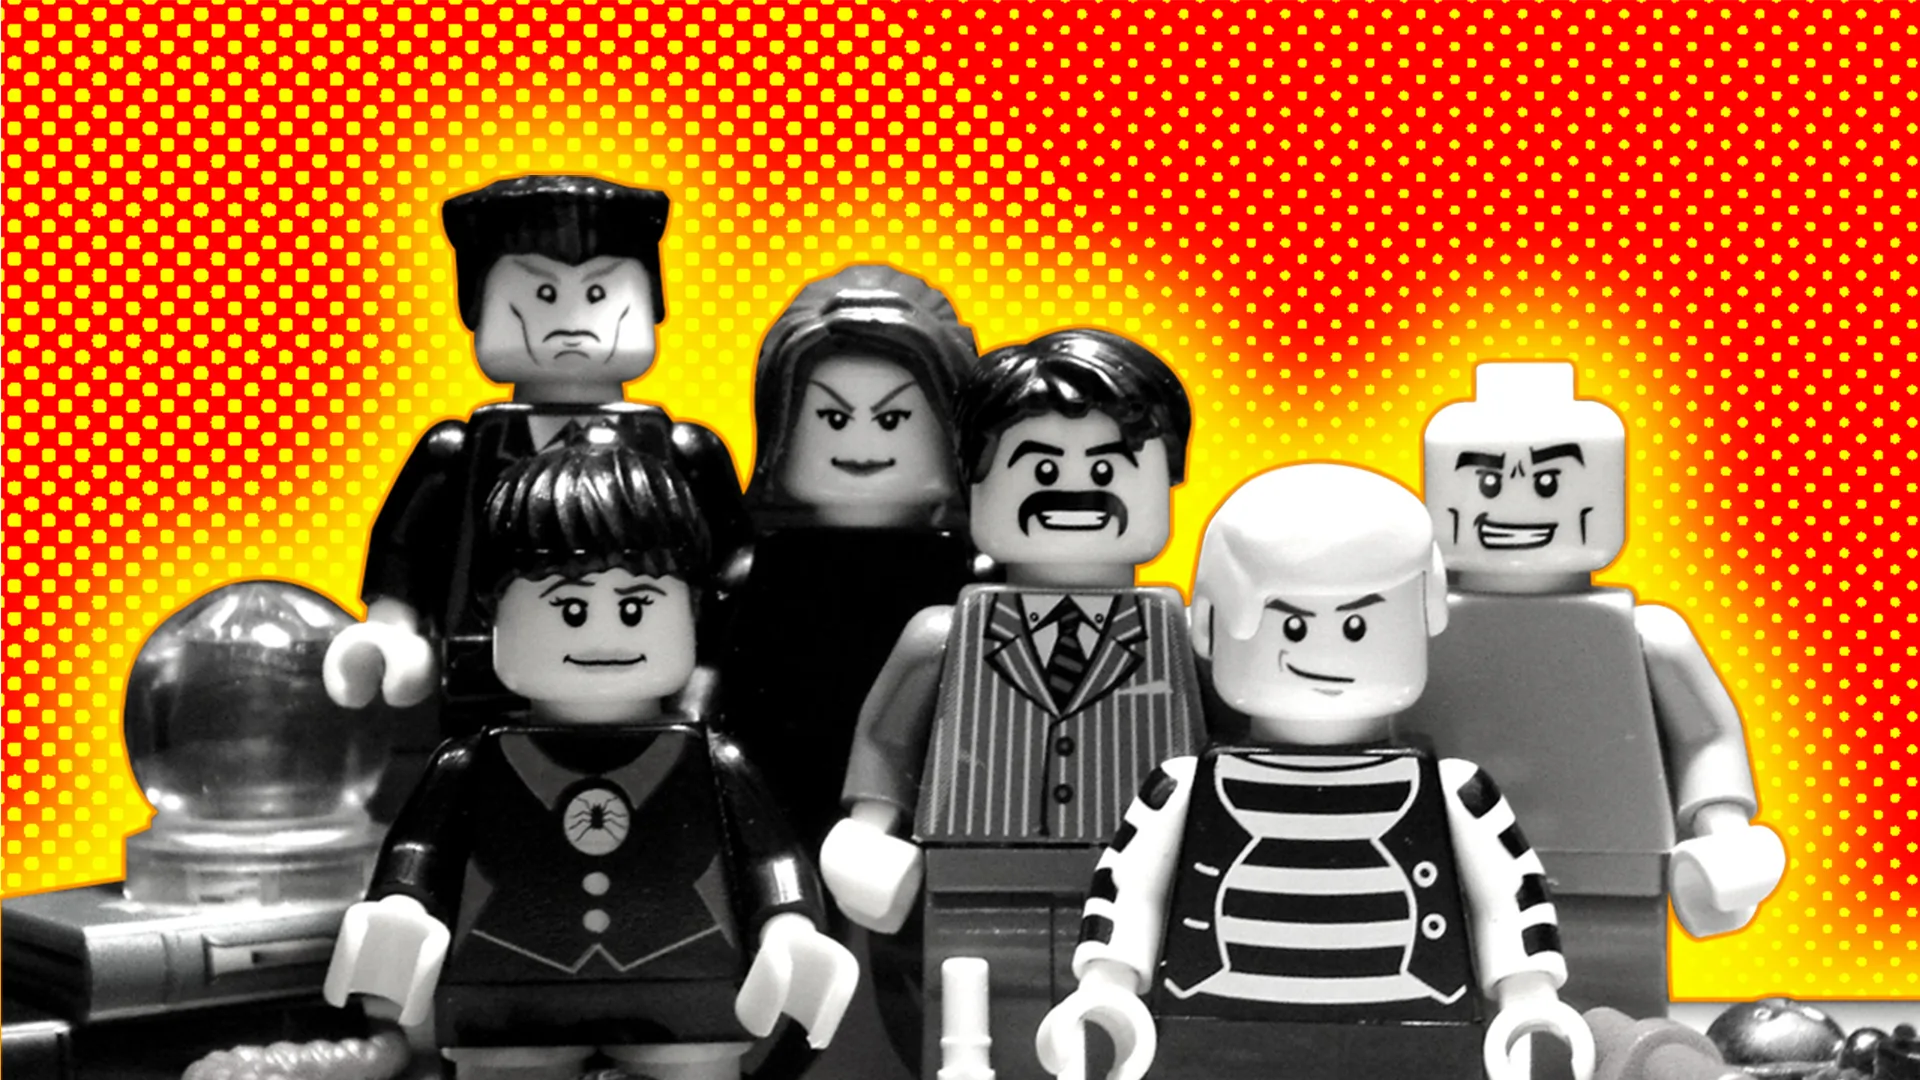 Lego Adams Family with a polkadot background and a glow around the image